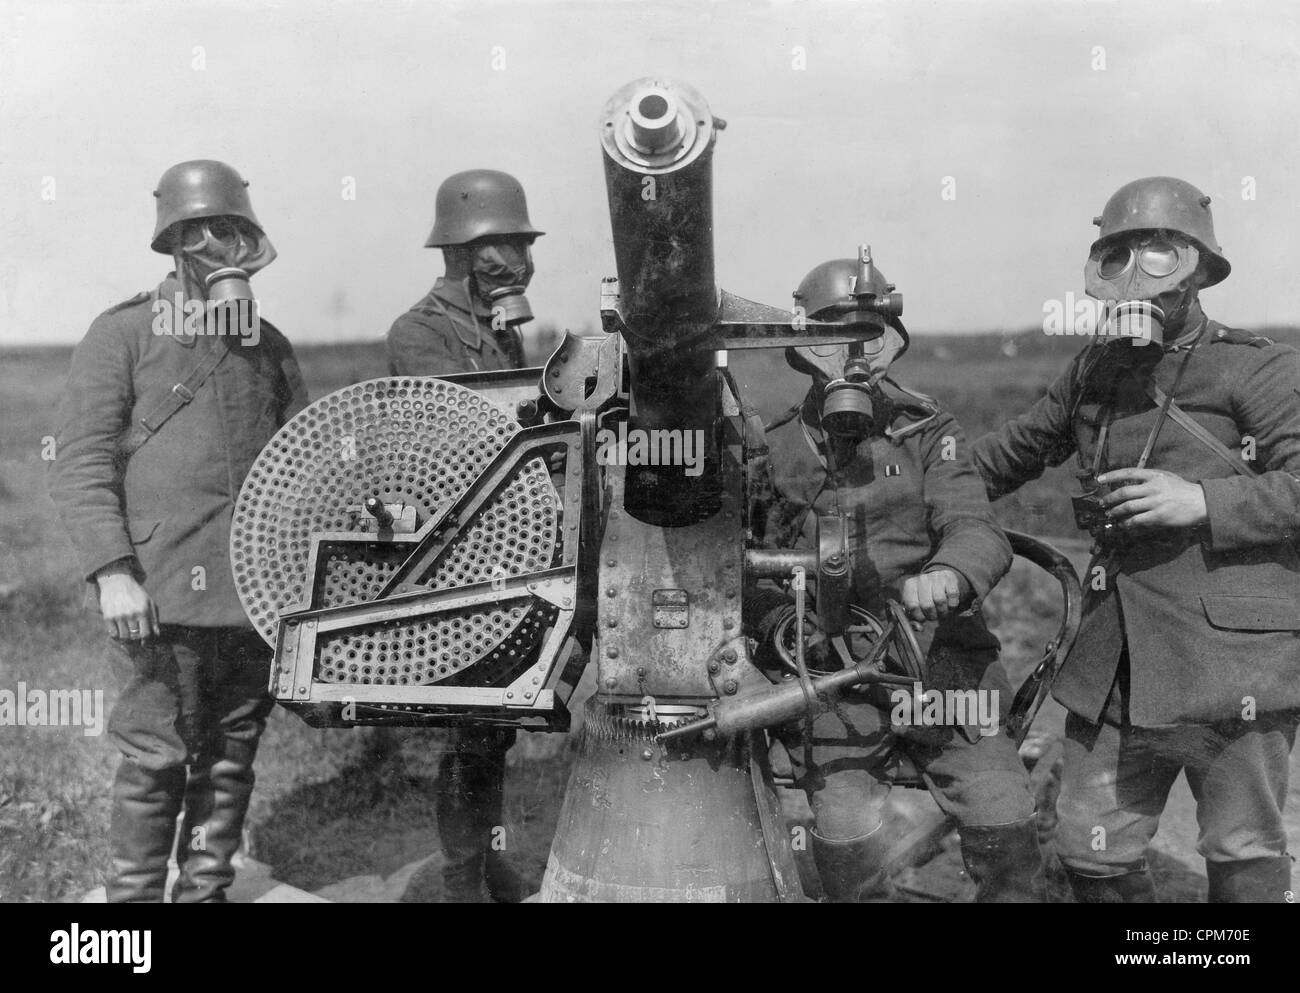 German soldiers at an autocannon used for air defense in WWI, 1918 Stock Photo